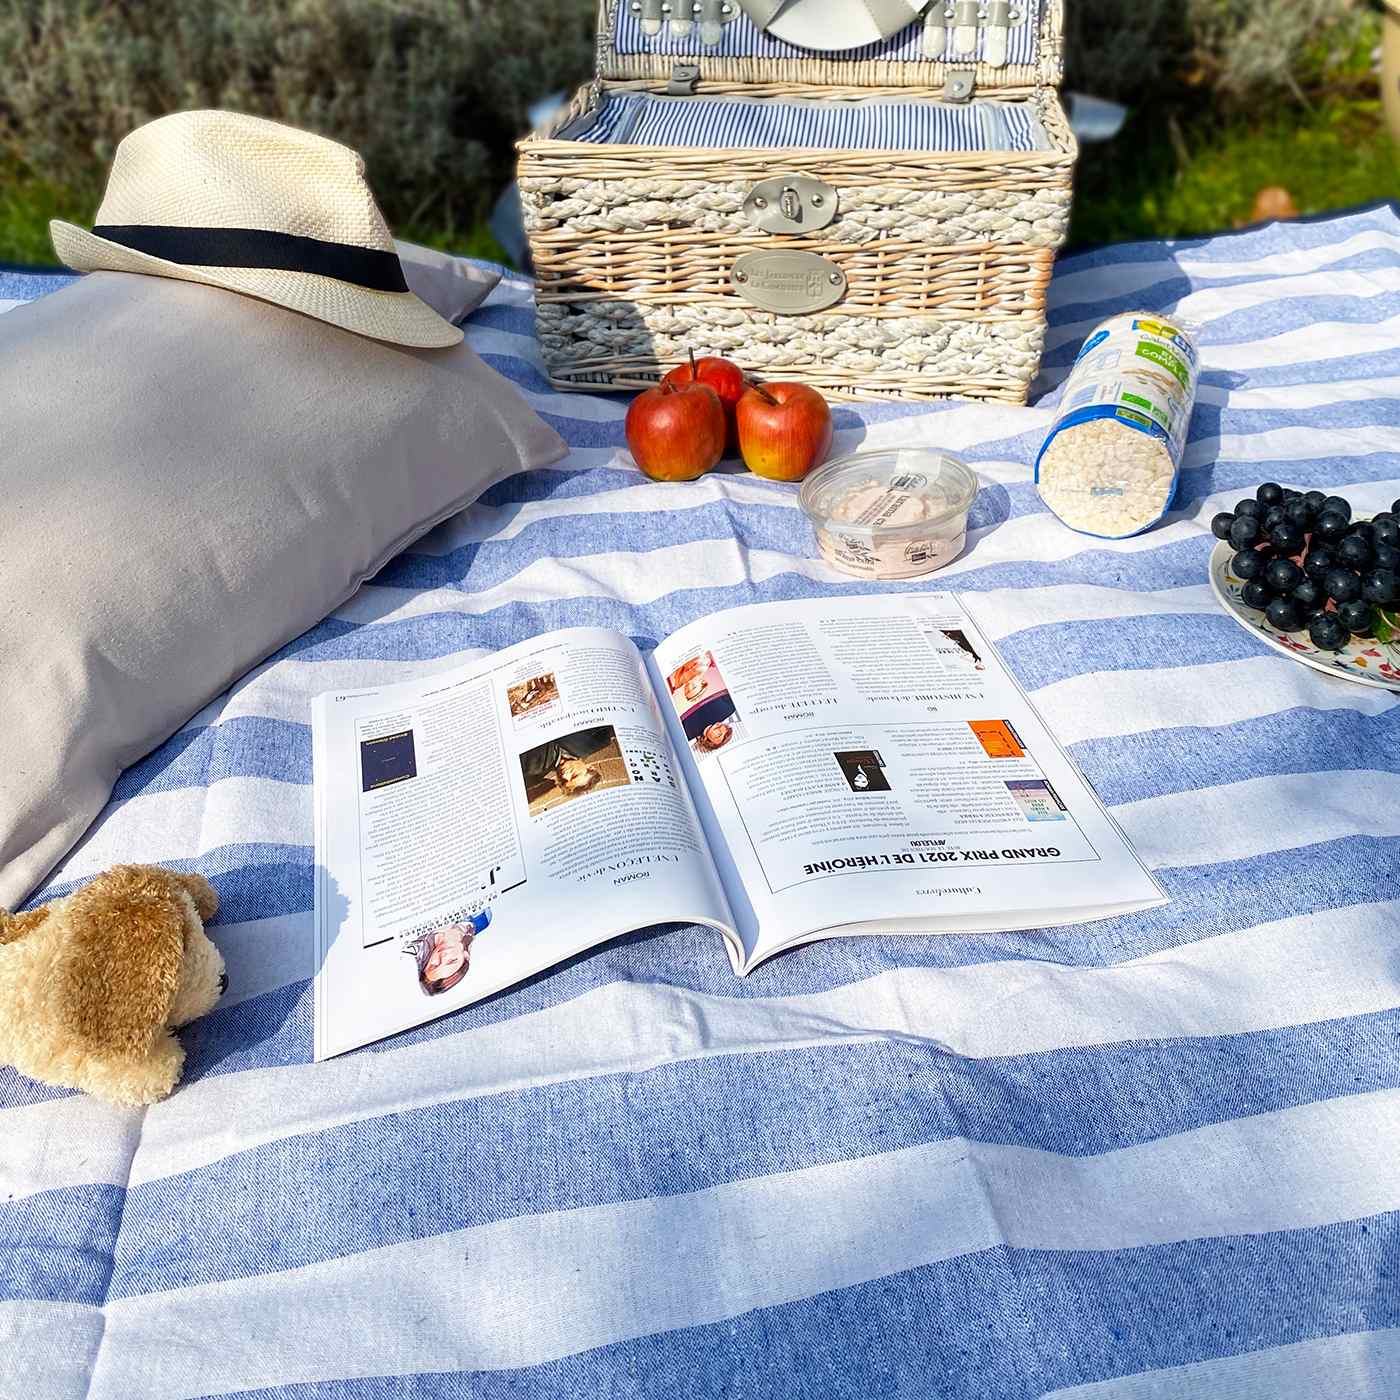 Waterproof picnic blanket blue sky and white XL